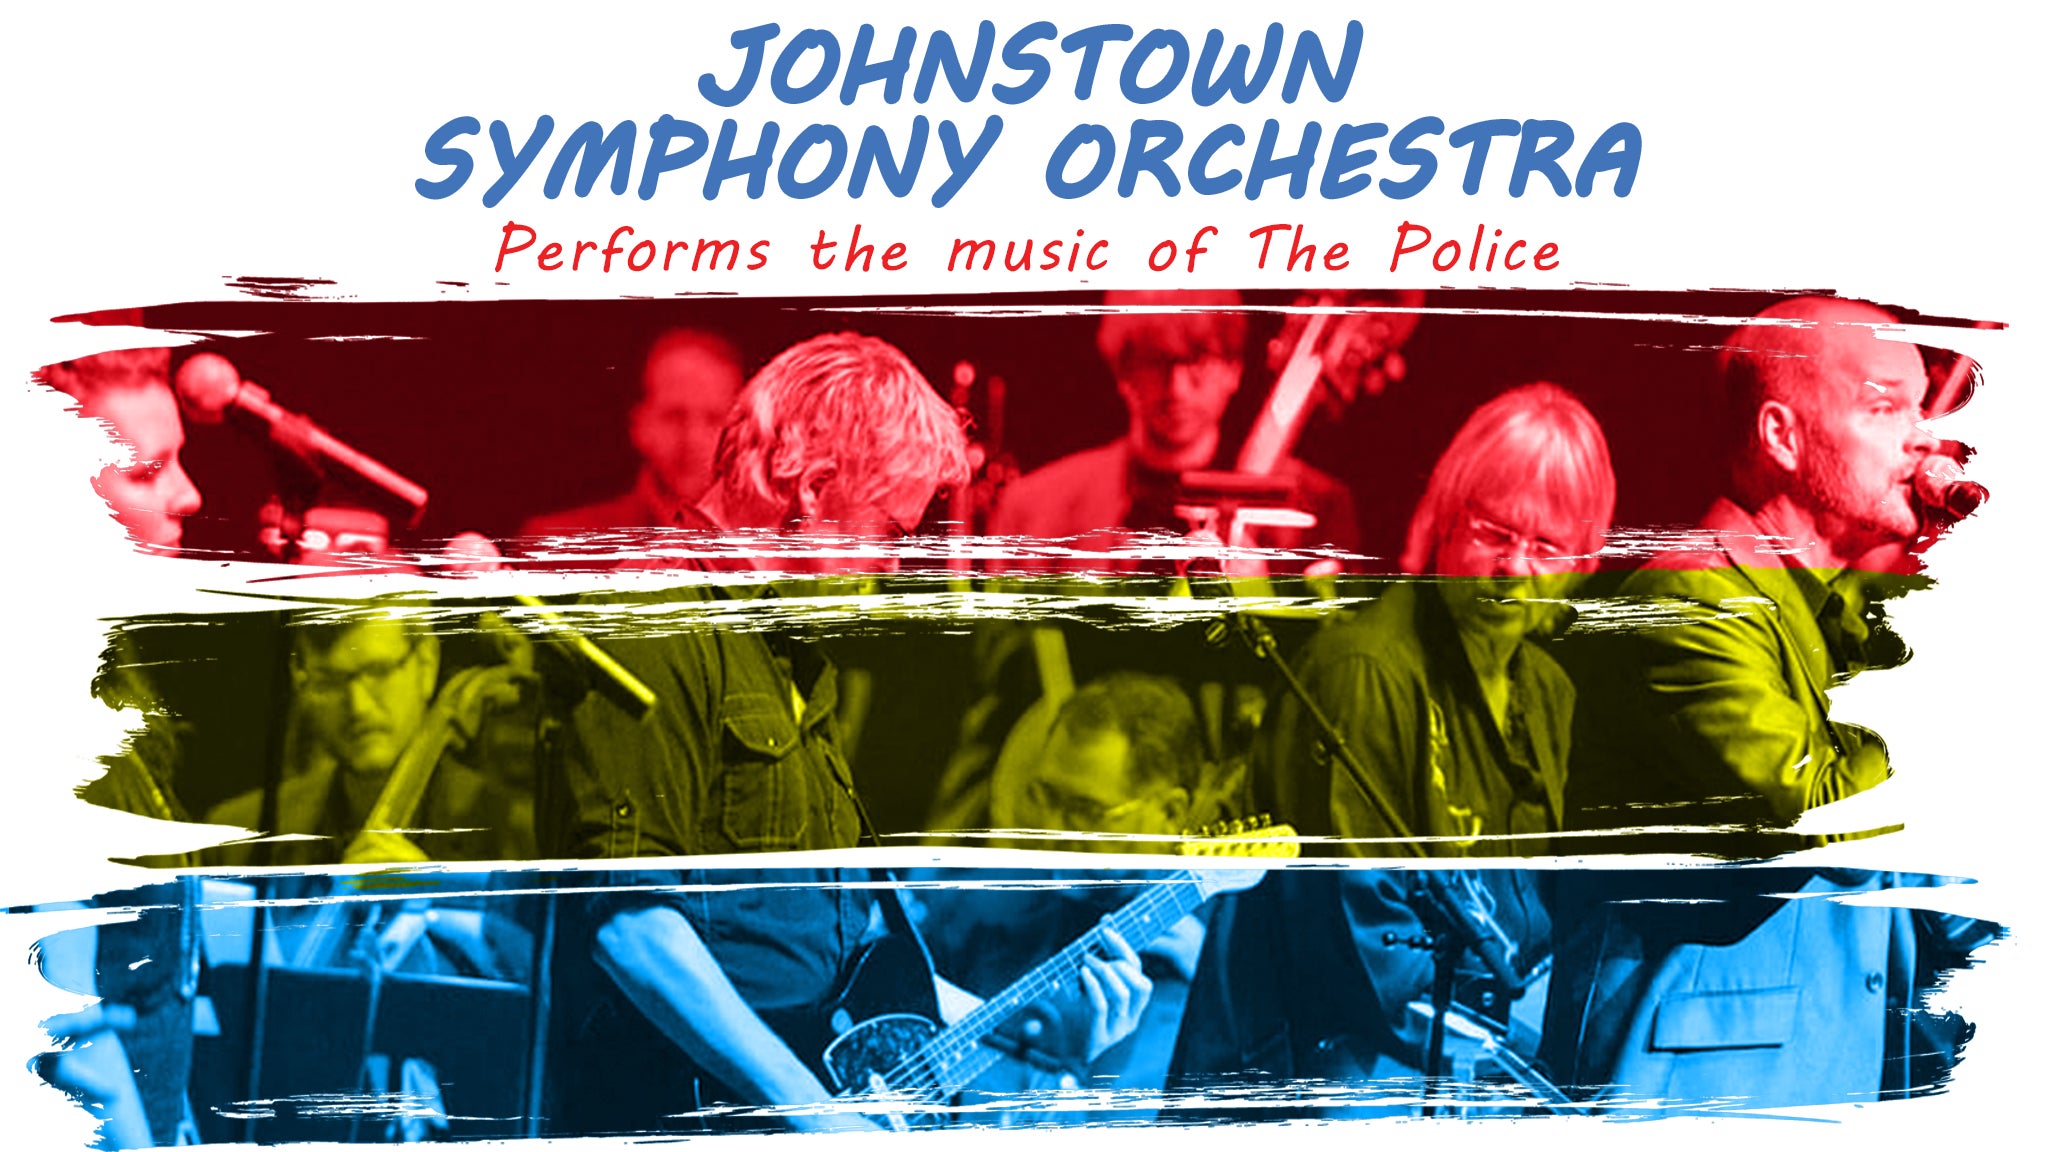 Johnstown Symphony Orchestra Performs the Music of The Police